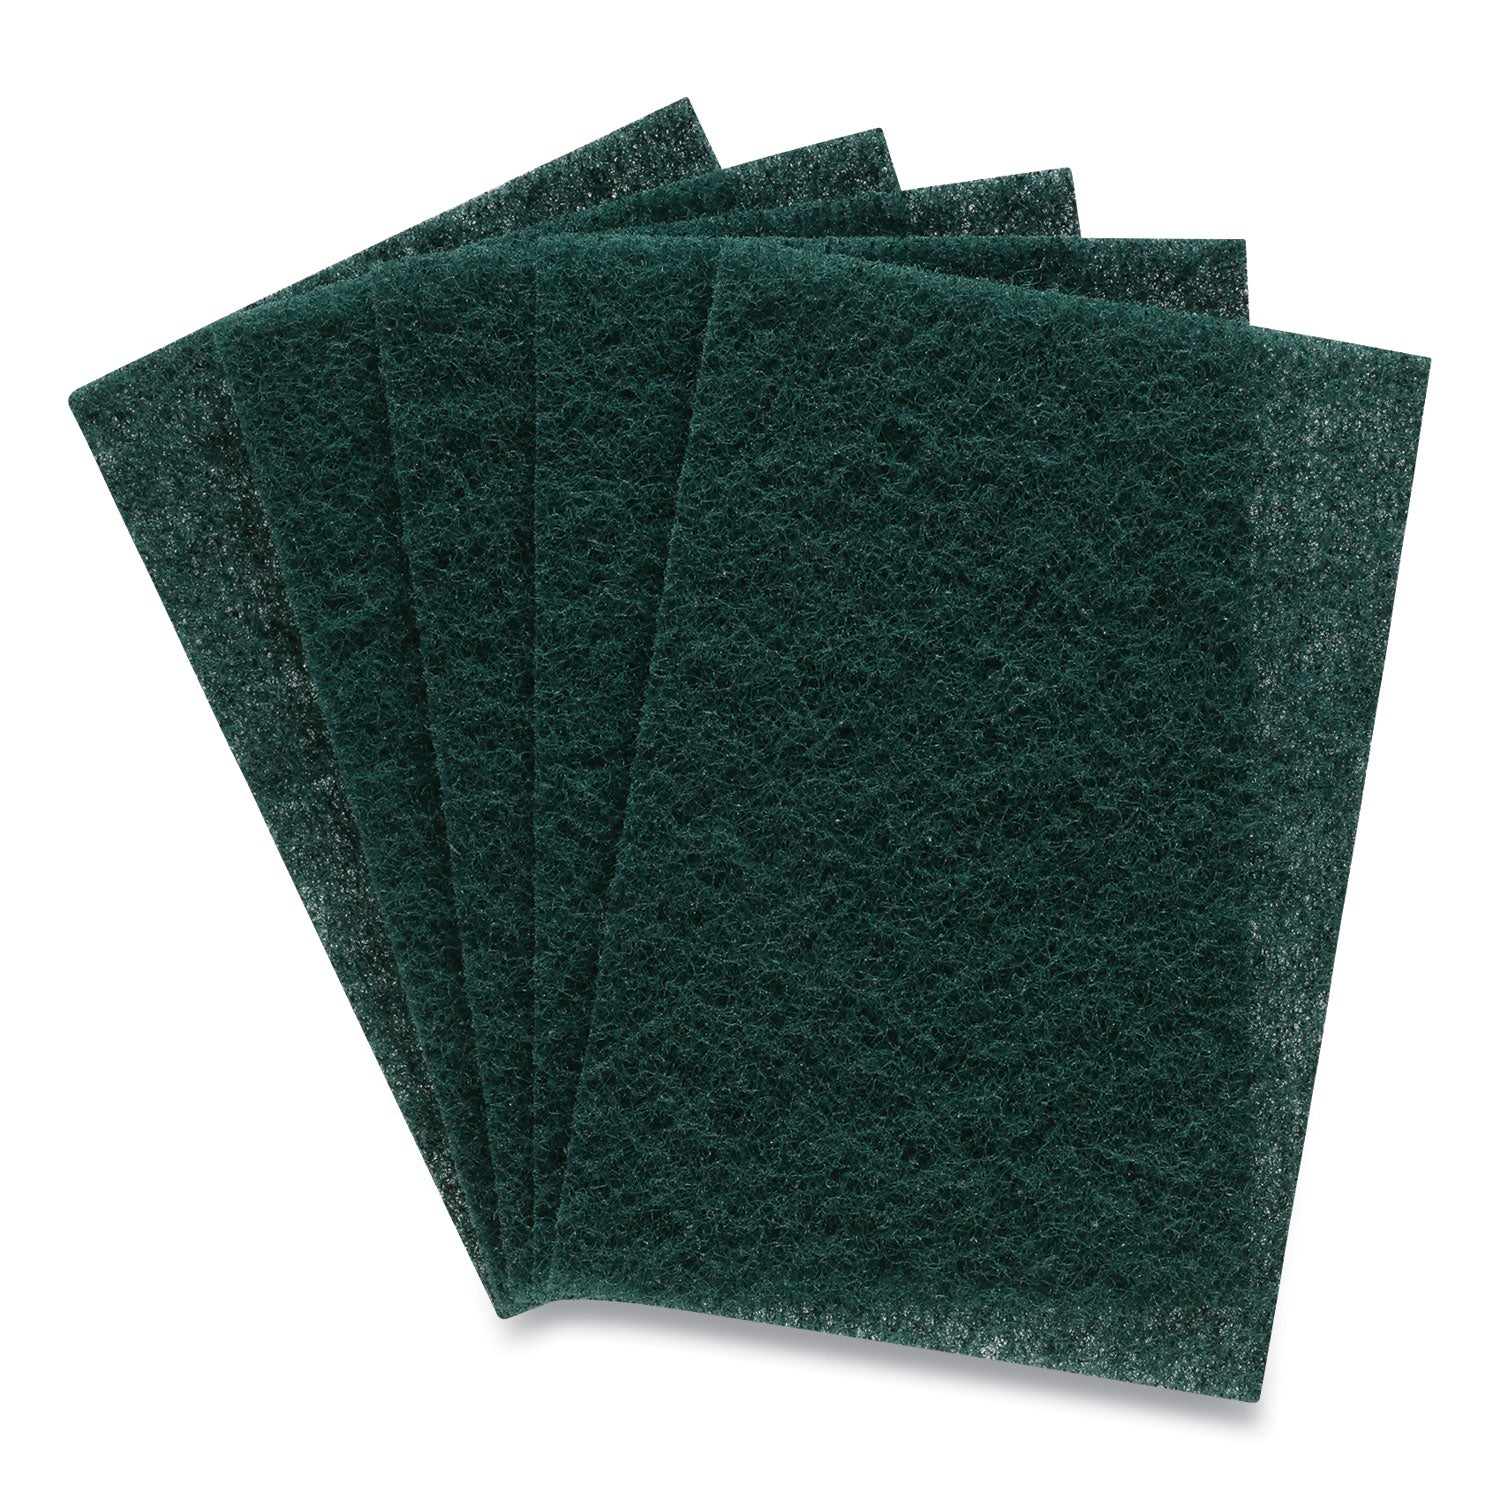 heavy-duty-scouring-pads-green-12-pack_cwz24418470 - 1